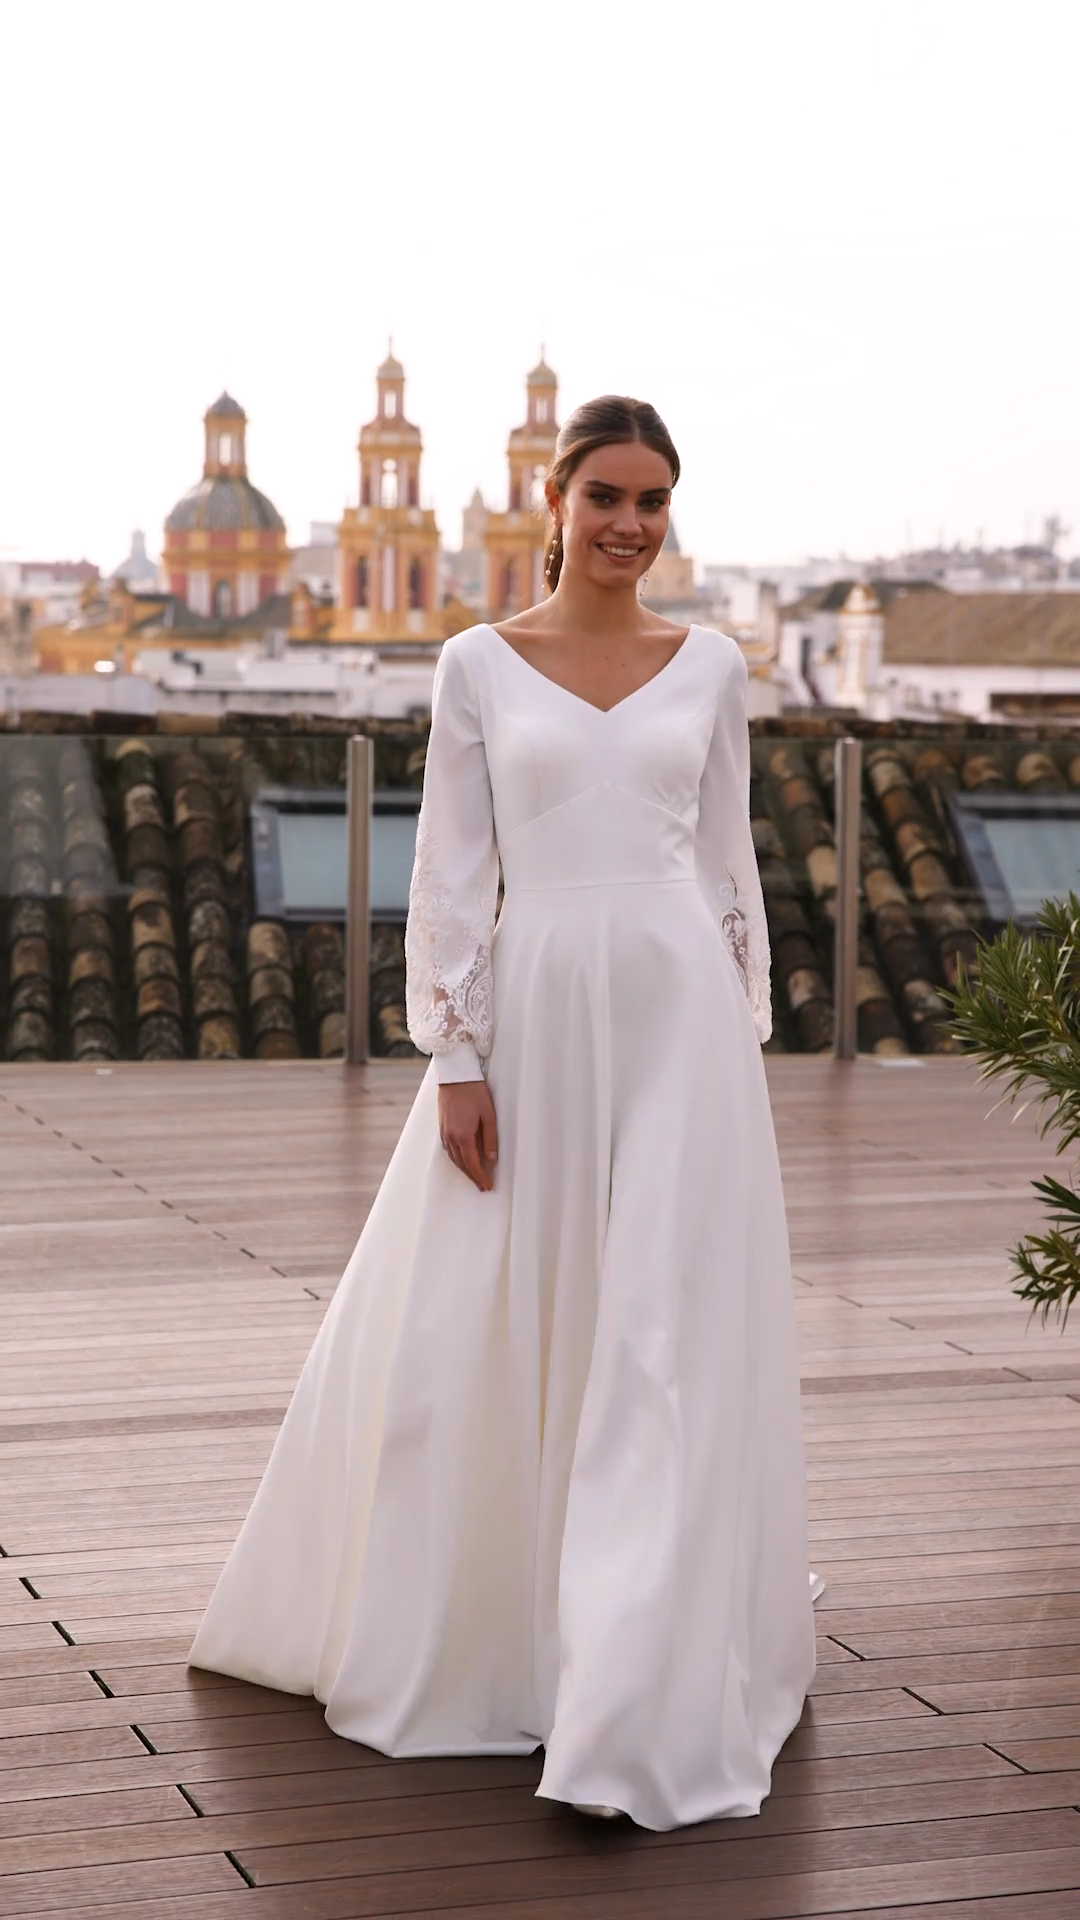 Modest Crepe A-line Wedding Dress with V-Neckline and Long Bishop Sleeves with Lace Cutouts Style M5075